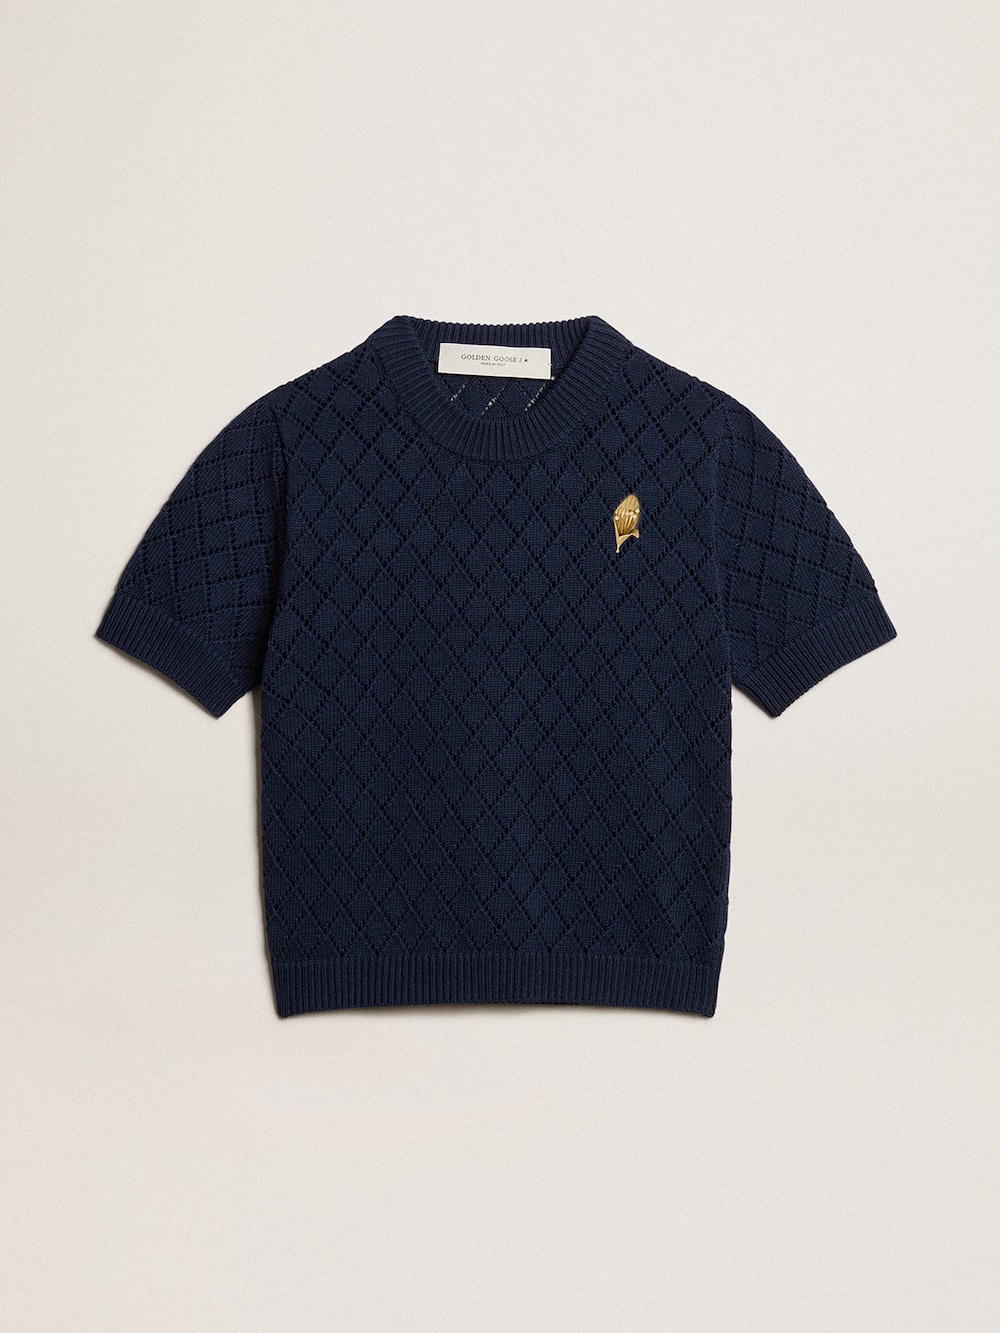 Golden Goose - Open-weave knit with midnight blue argyle pattern in 